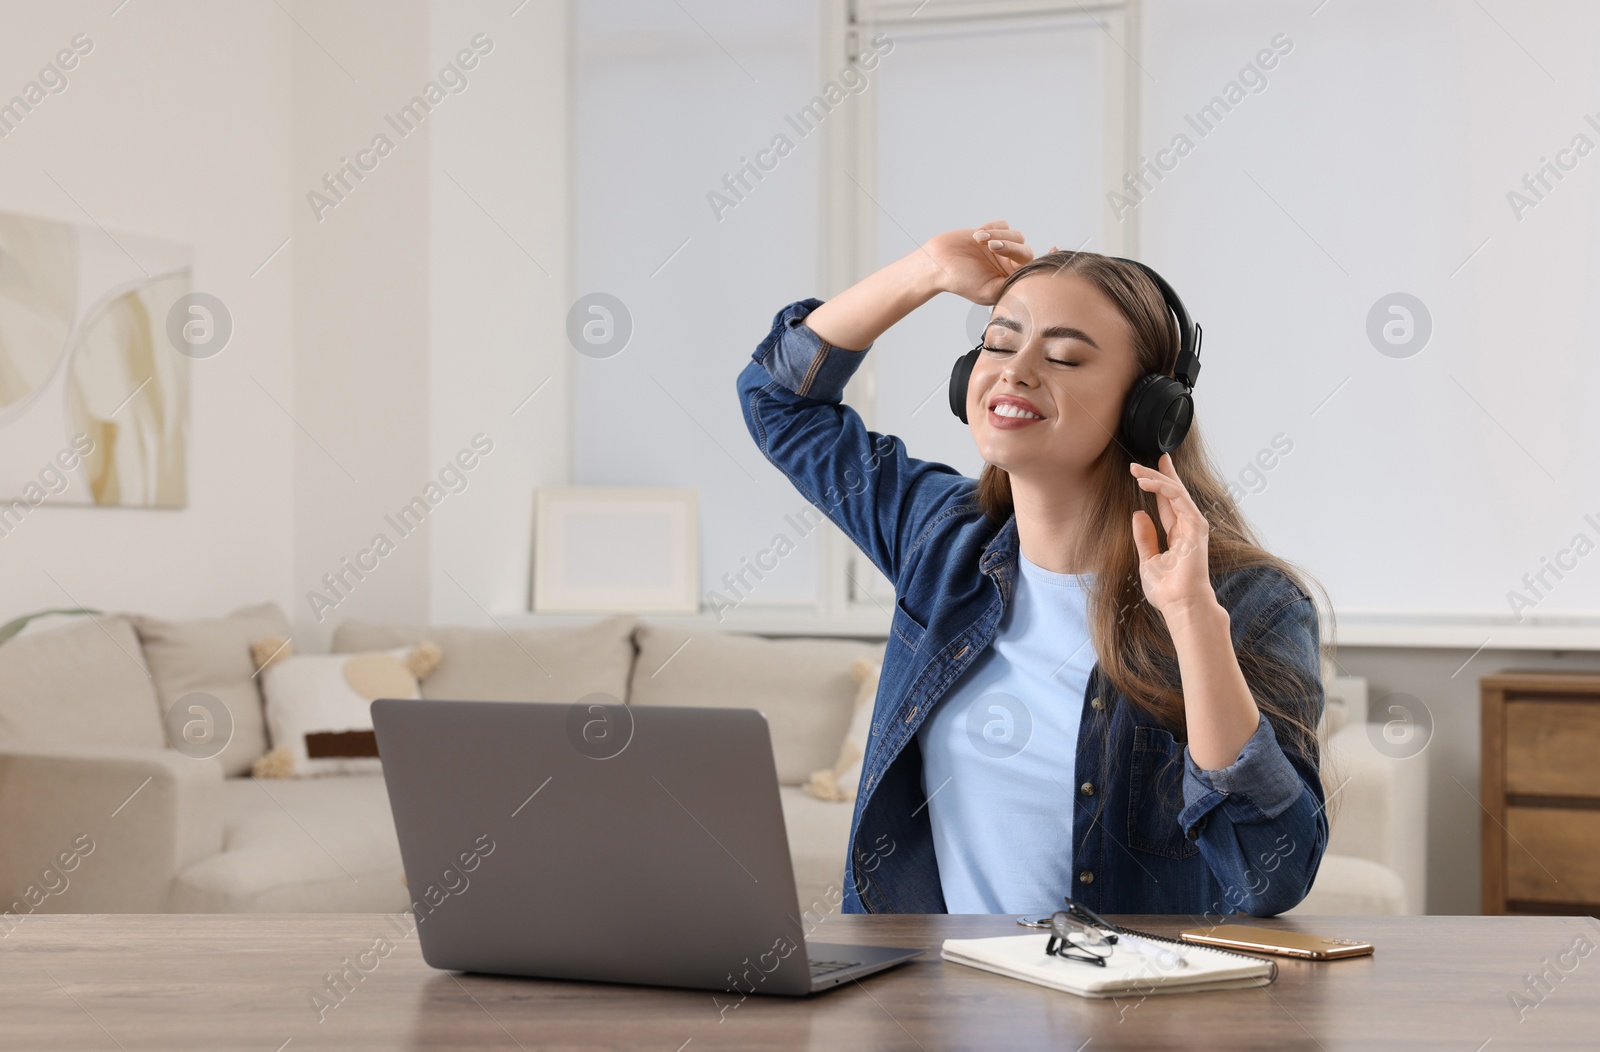 Photo of Happy woman with headphones listening to music near laptop at wooden table in room